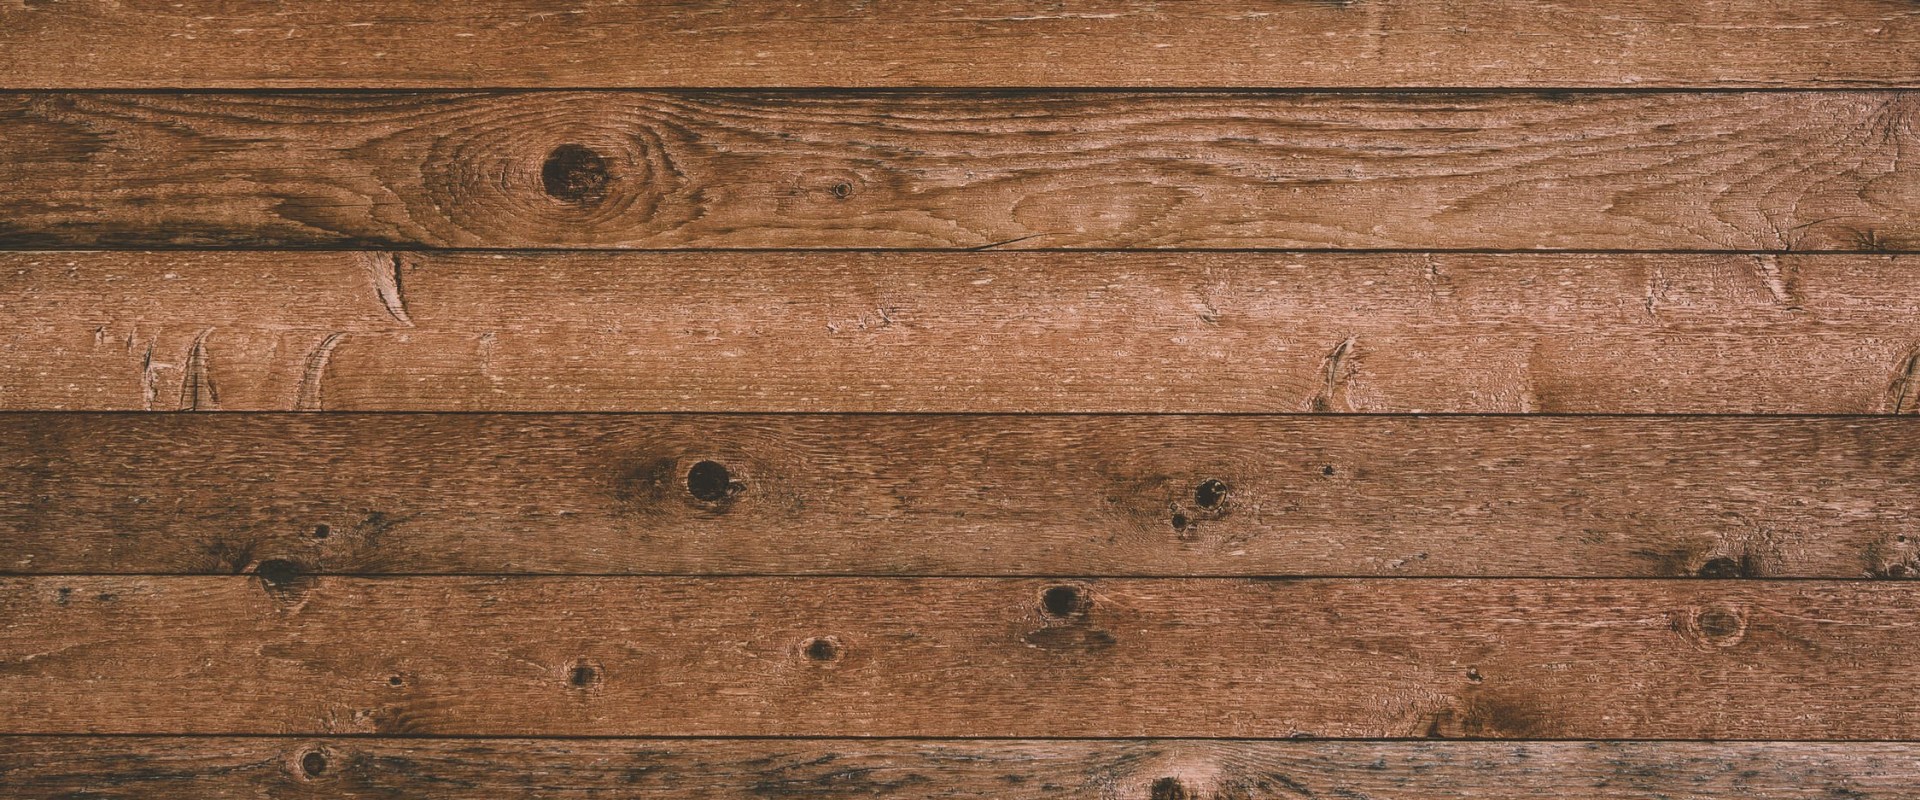 The Impact Of Hardwood Flooring In A Home Buying Process In Las Vegas